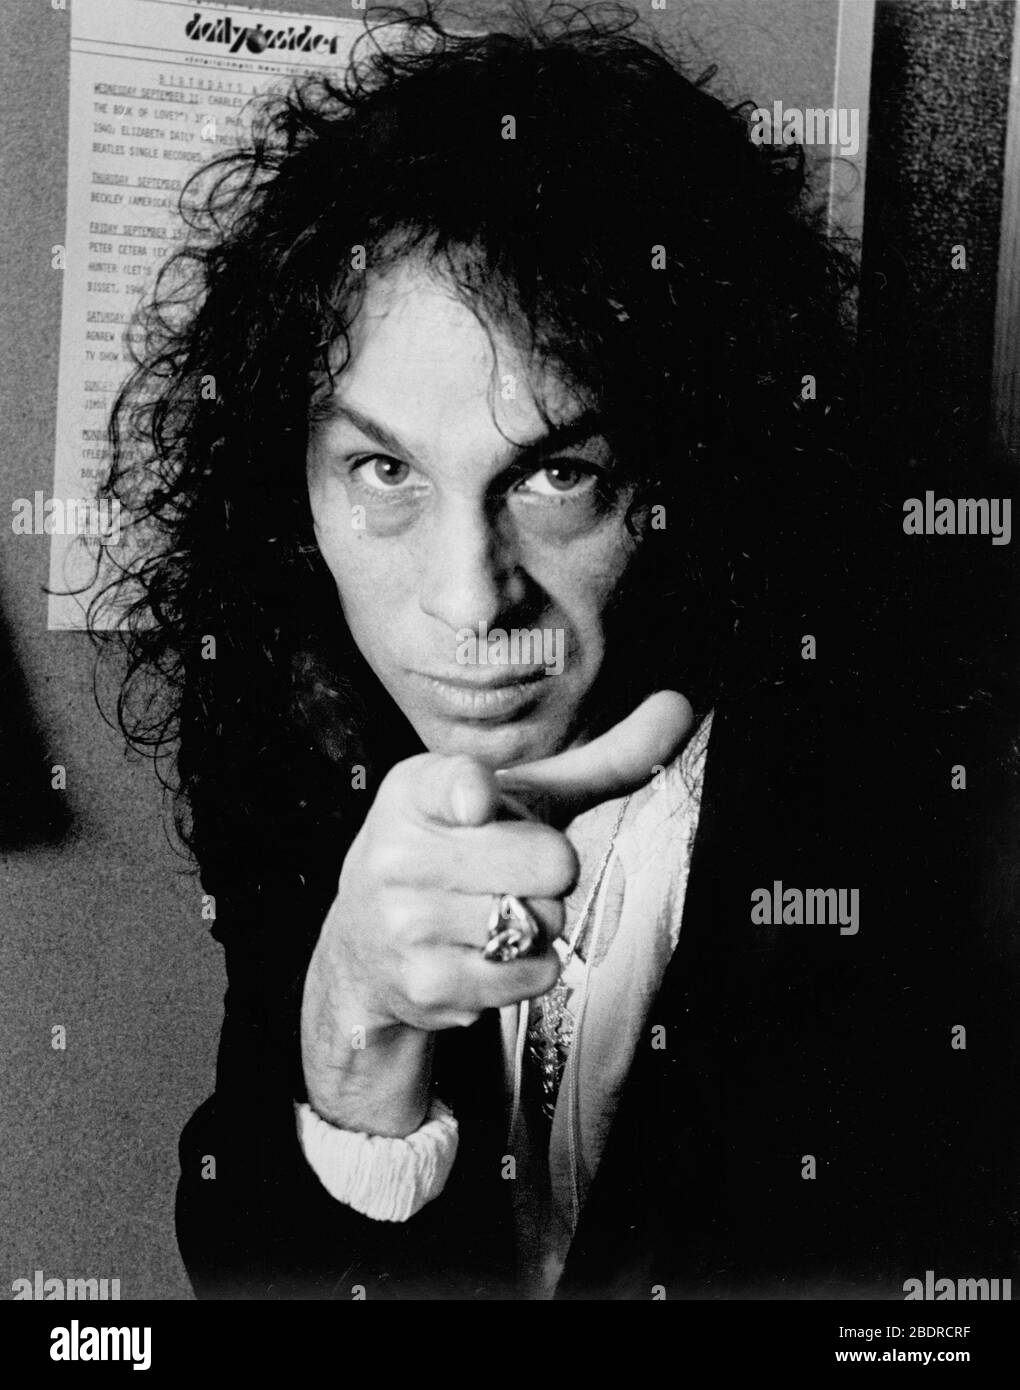 Ronnie James Dio (July 10, 1942 Ð May 16, 2010) was an American heavy metal vocalist and songwriter. He performed with Elf, Rainbow, Black Sabbath, Heaven & Hell, and his own band Dio. Credit: Scott Weiner/MediaPunch Stock Photo